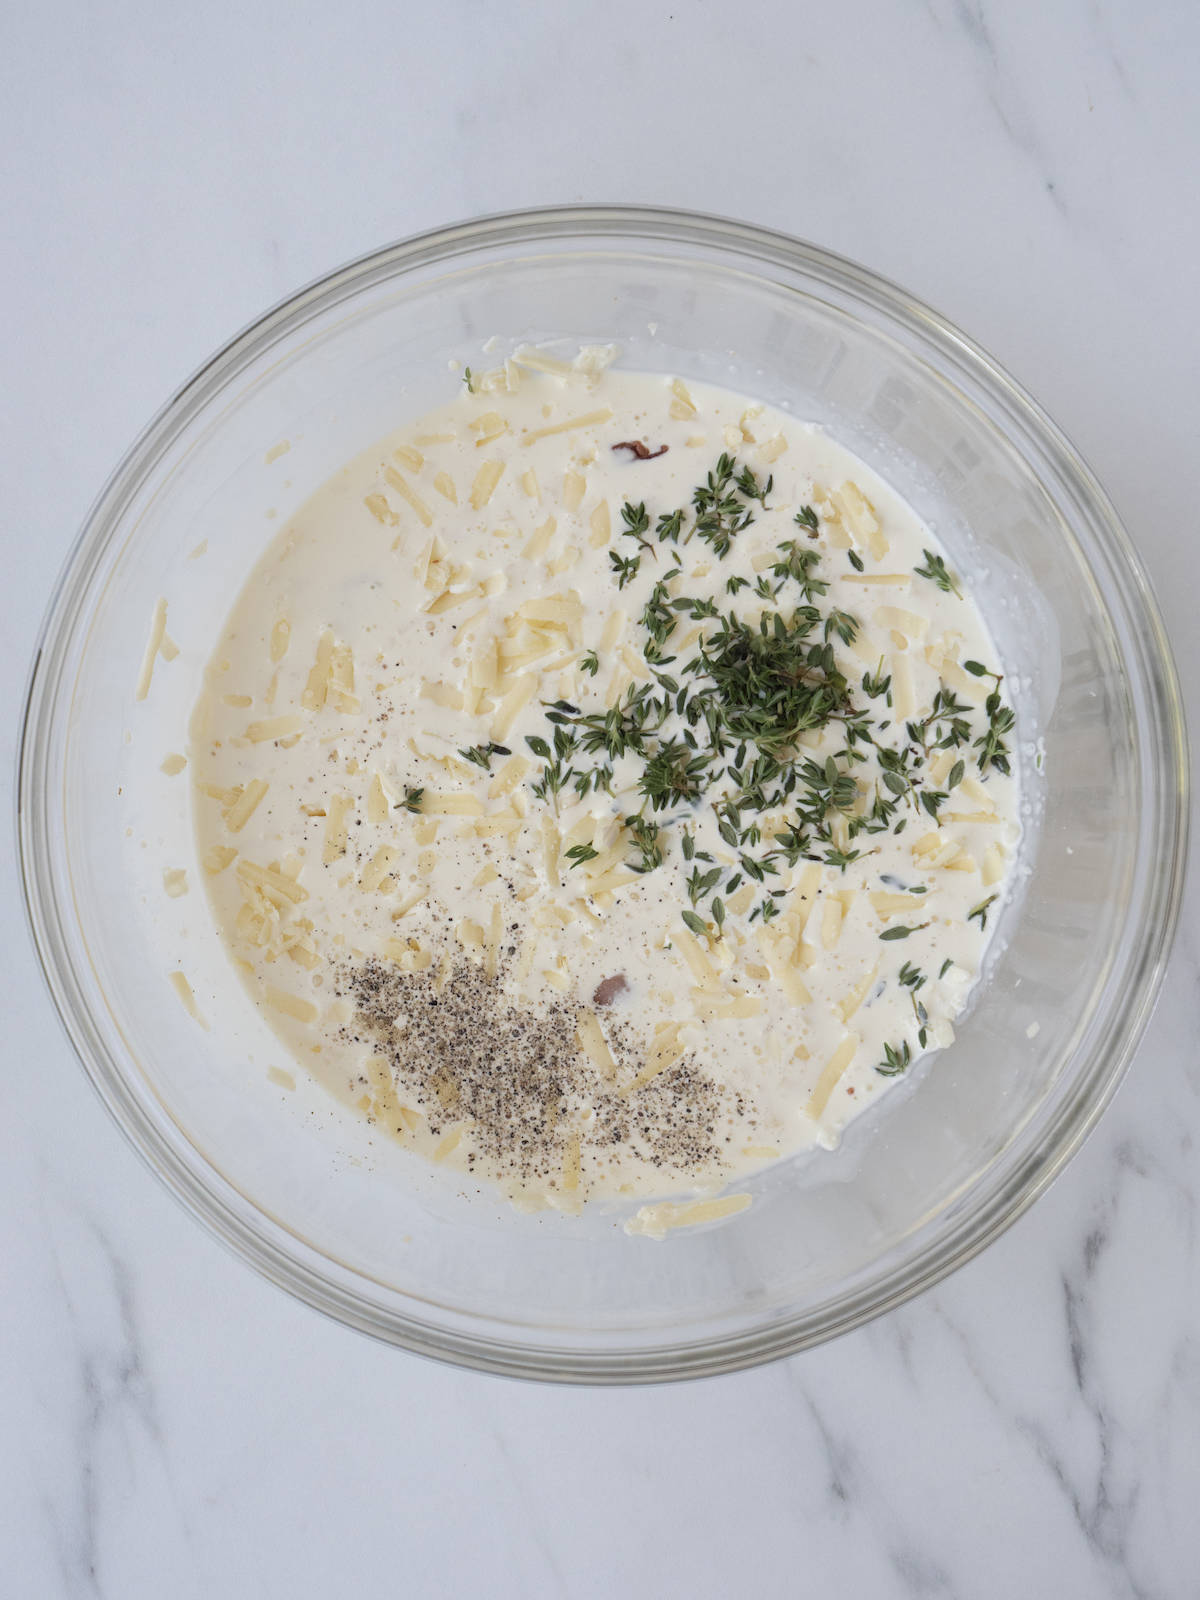 A glass mixing bowl with cheese, pancetta, thyme, cream and garlic, seasoned with salt and pepper.